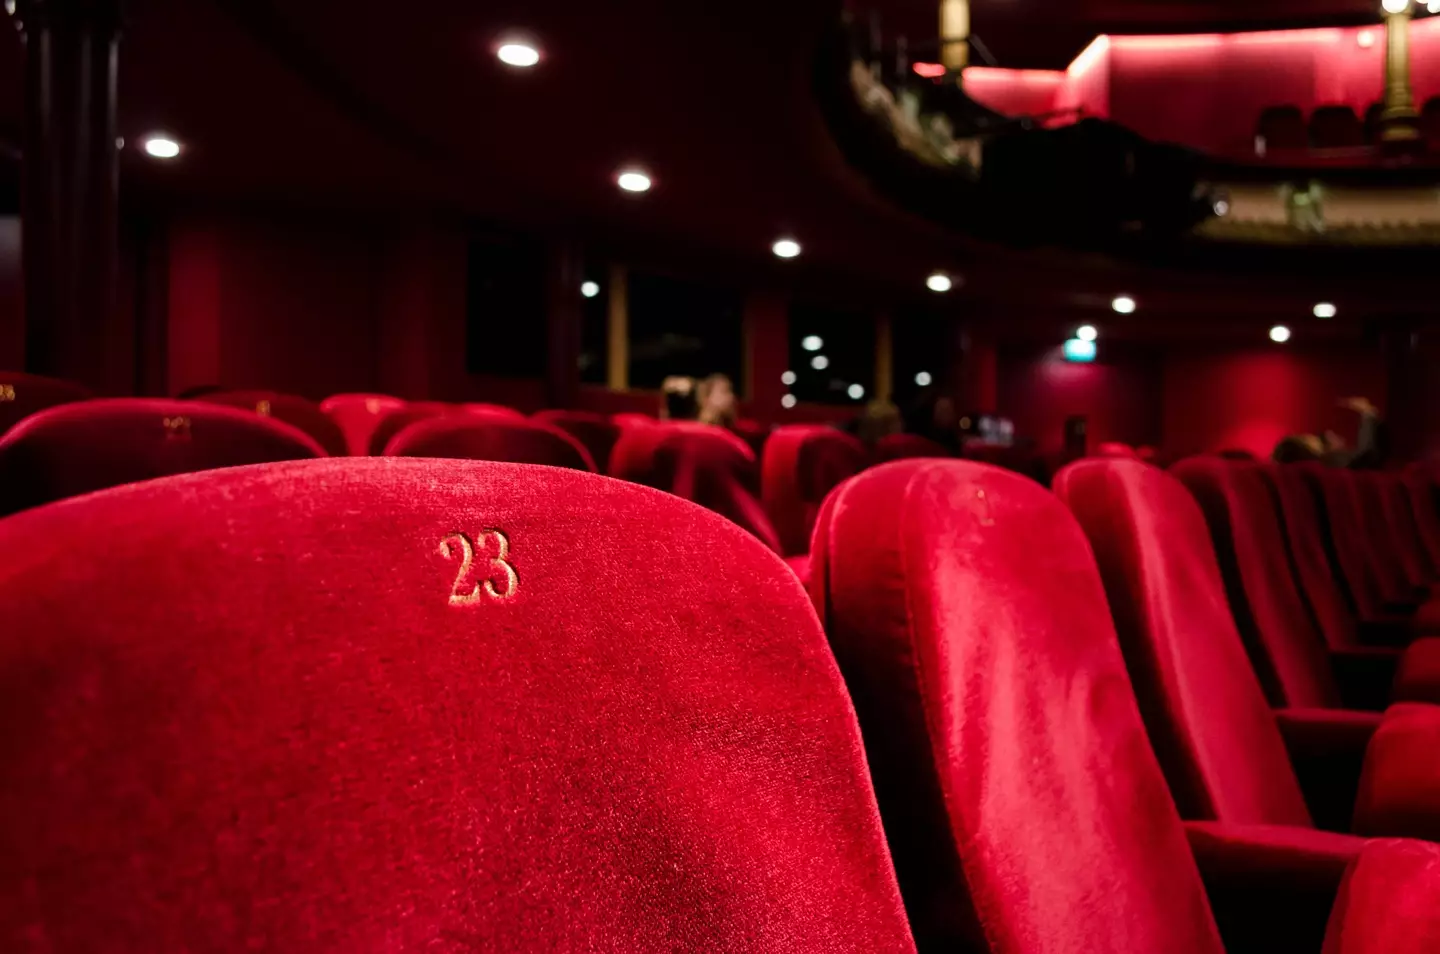 A cinema has been forced to give refunds worth up to £1,300 after the ‘Gentleminions’ trend on TikTok.